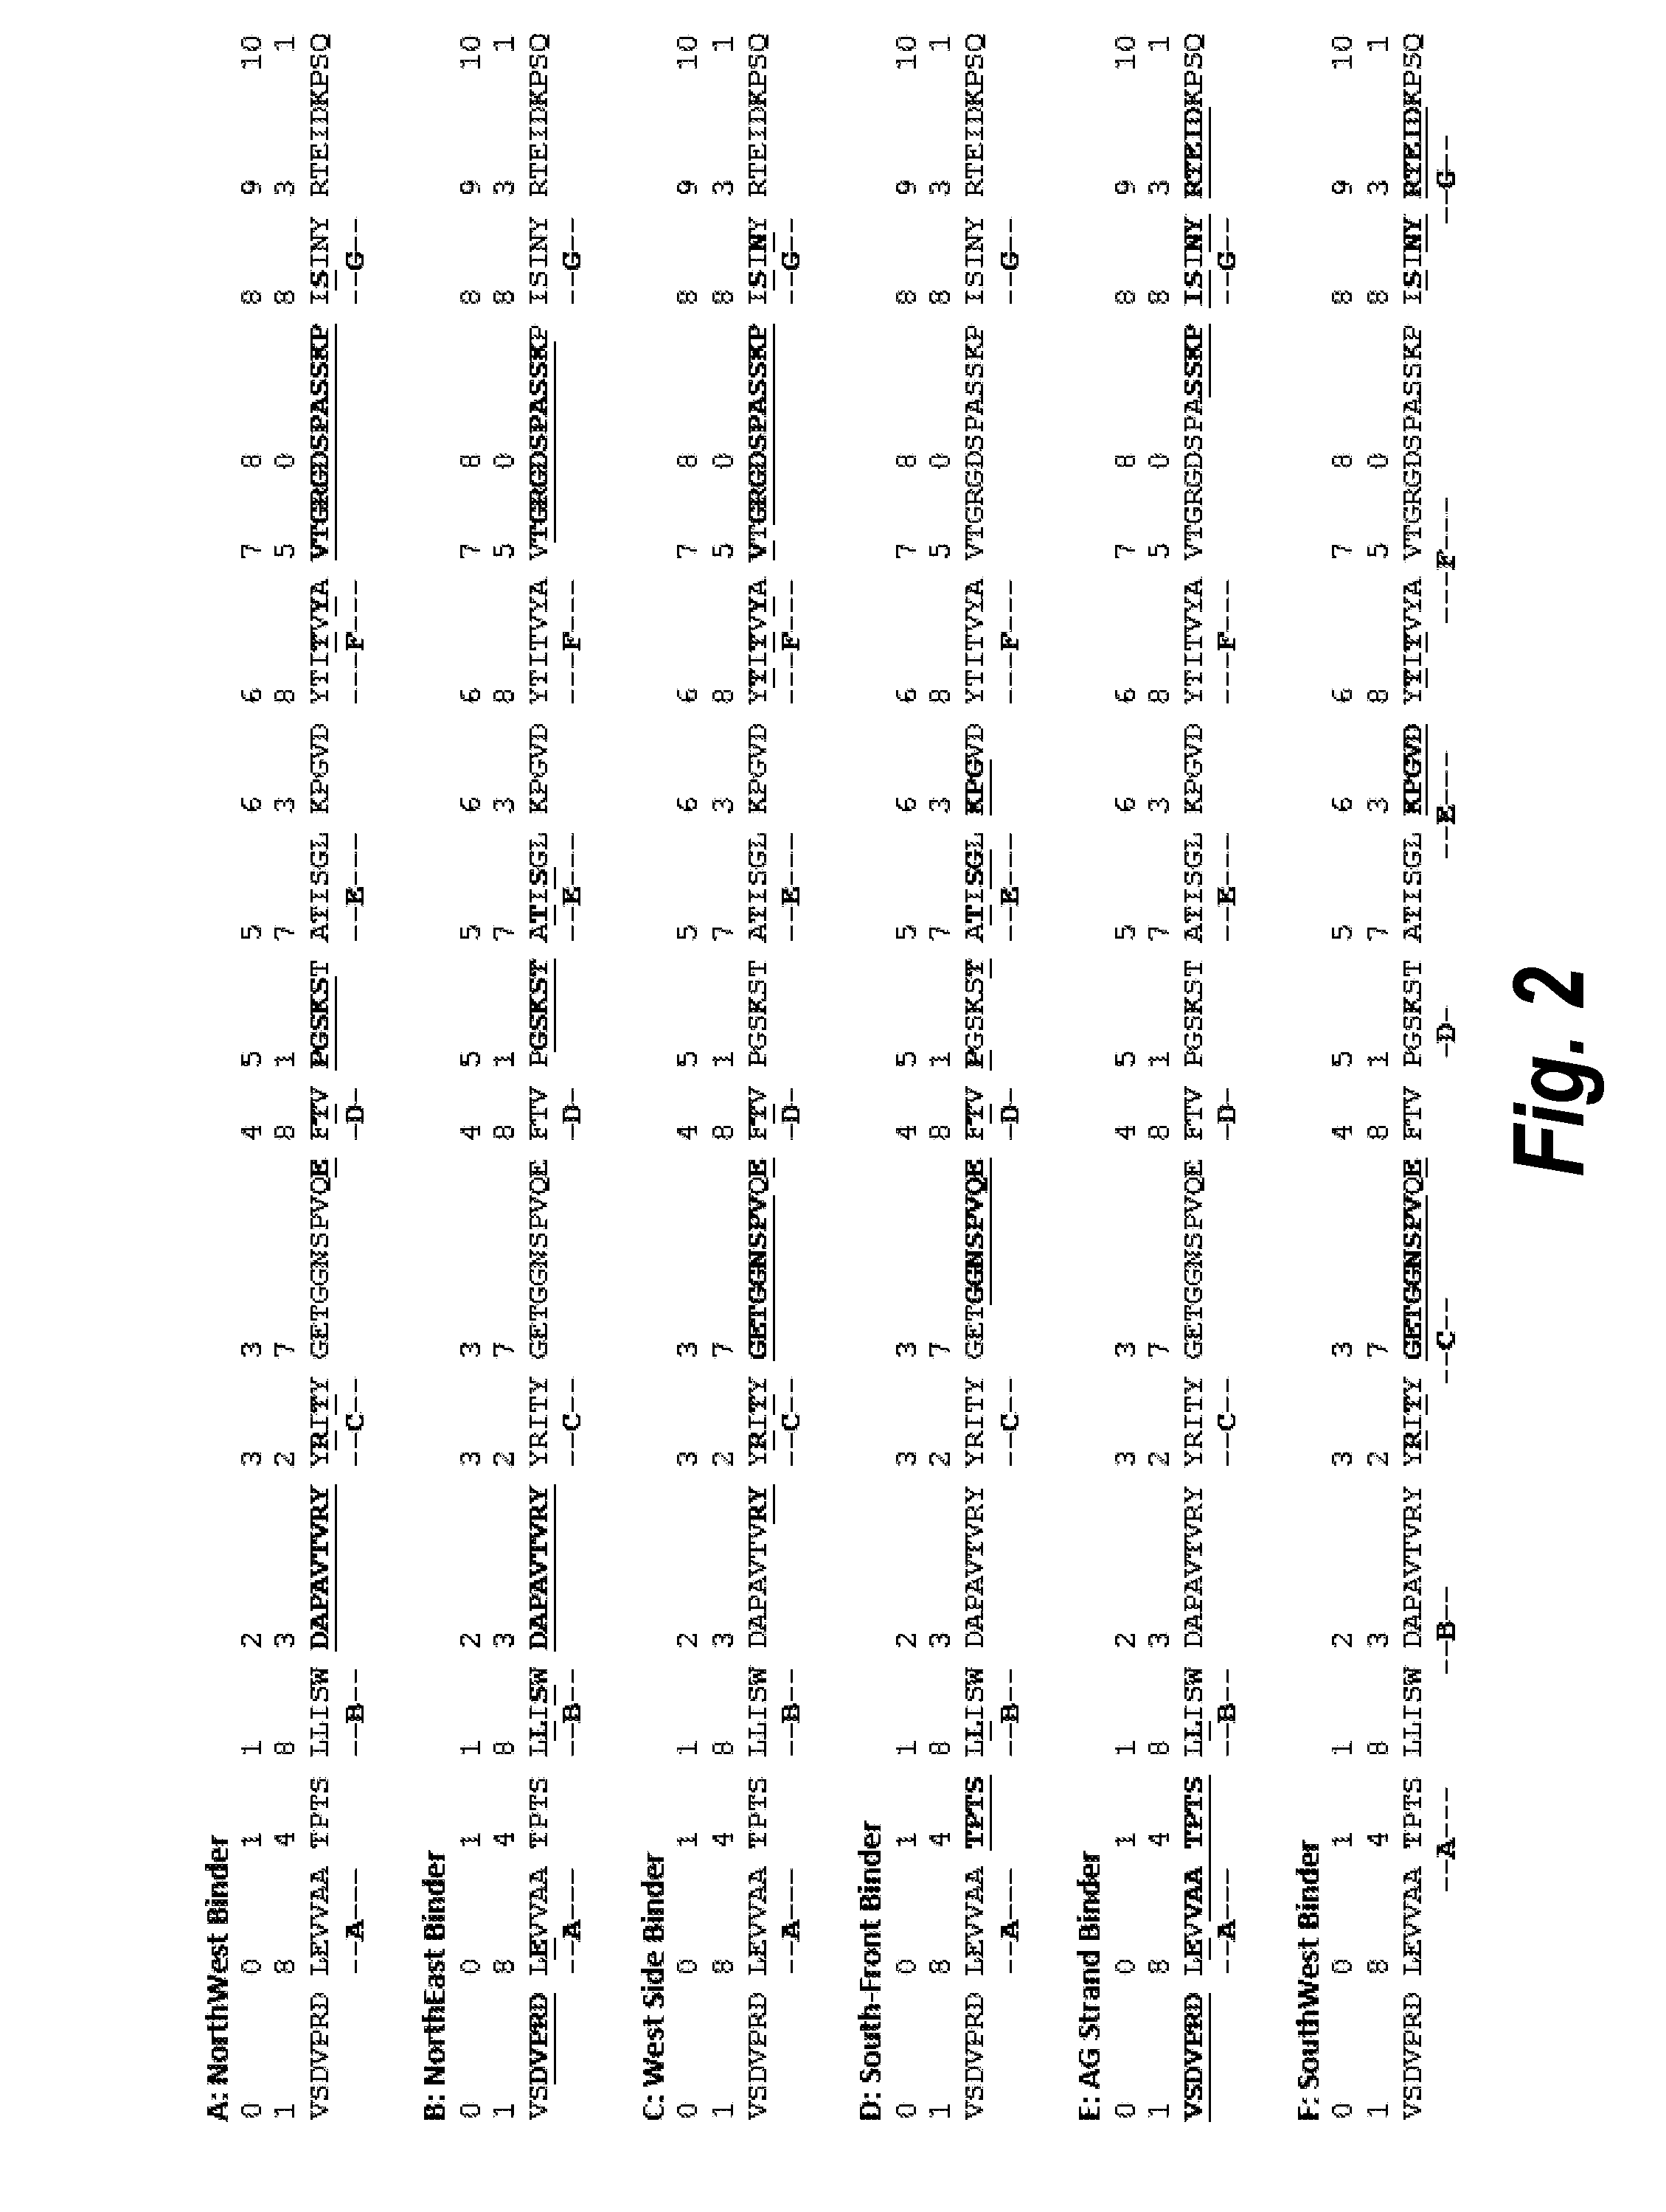 Fibronectin binding domains with reduced immunogenicity